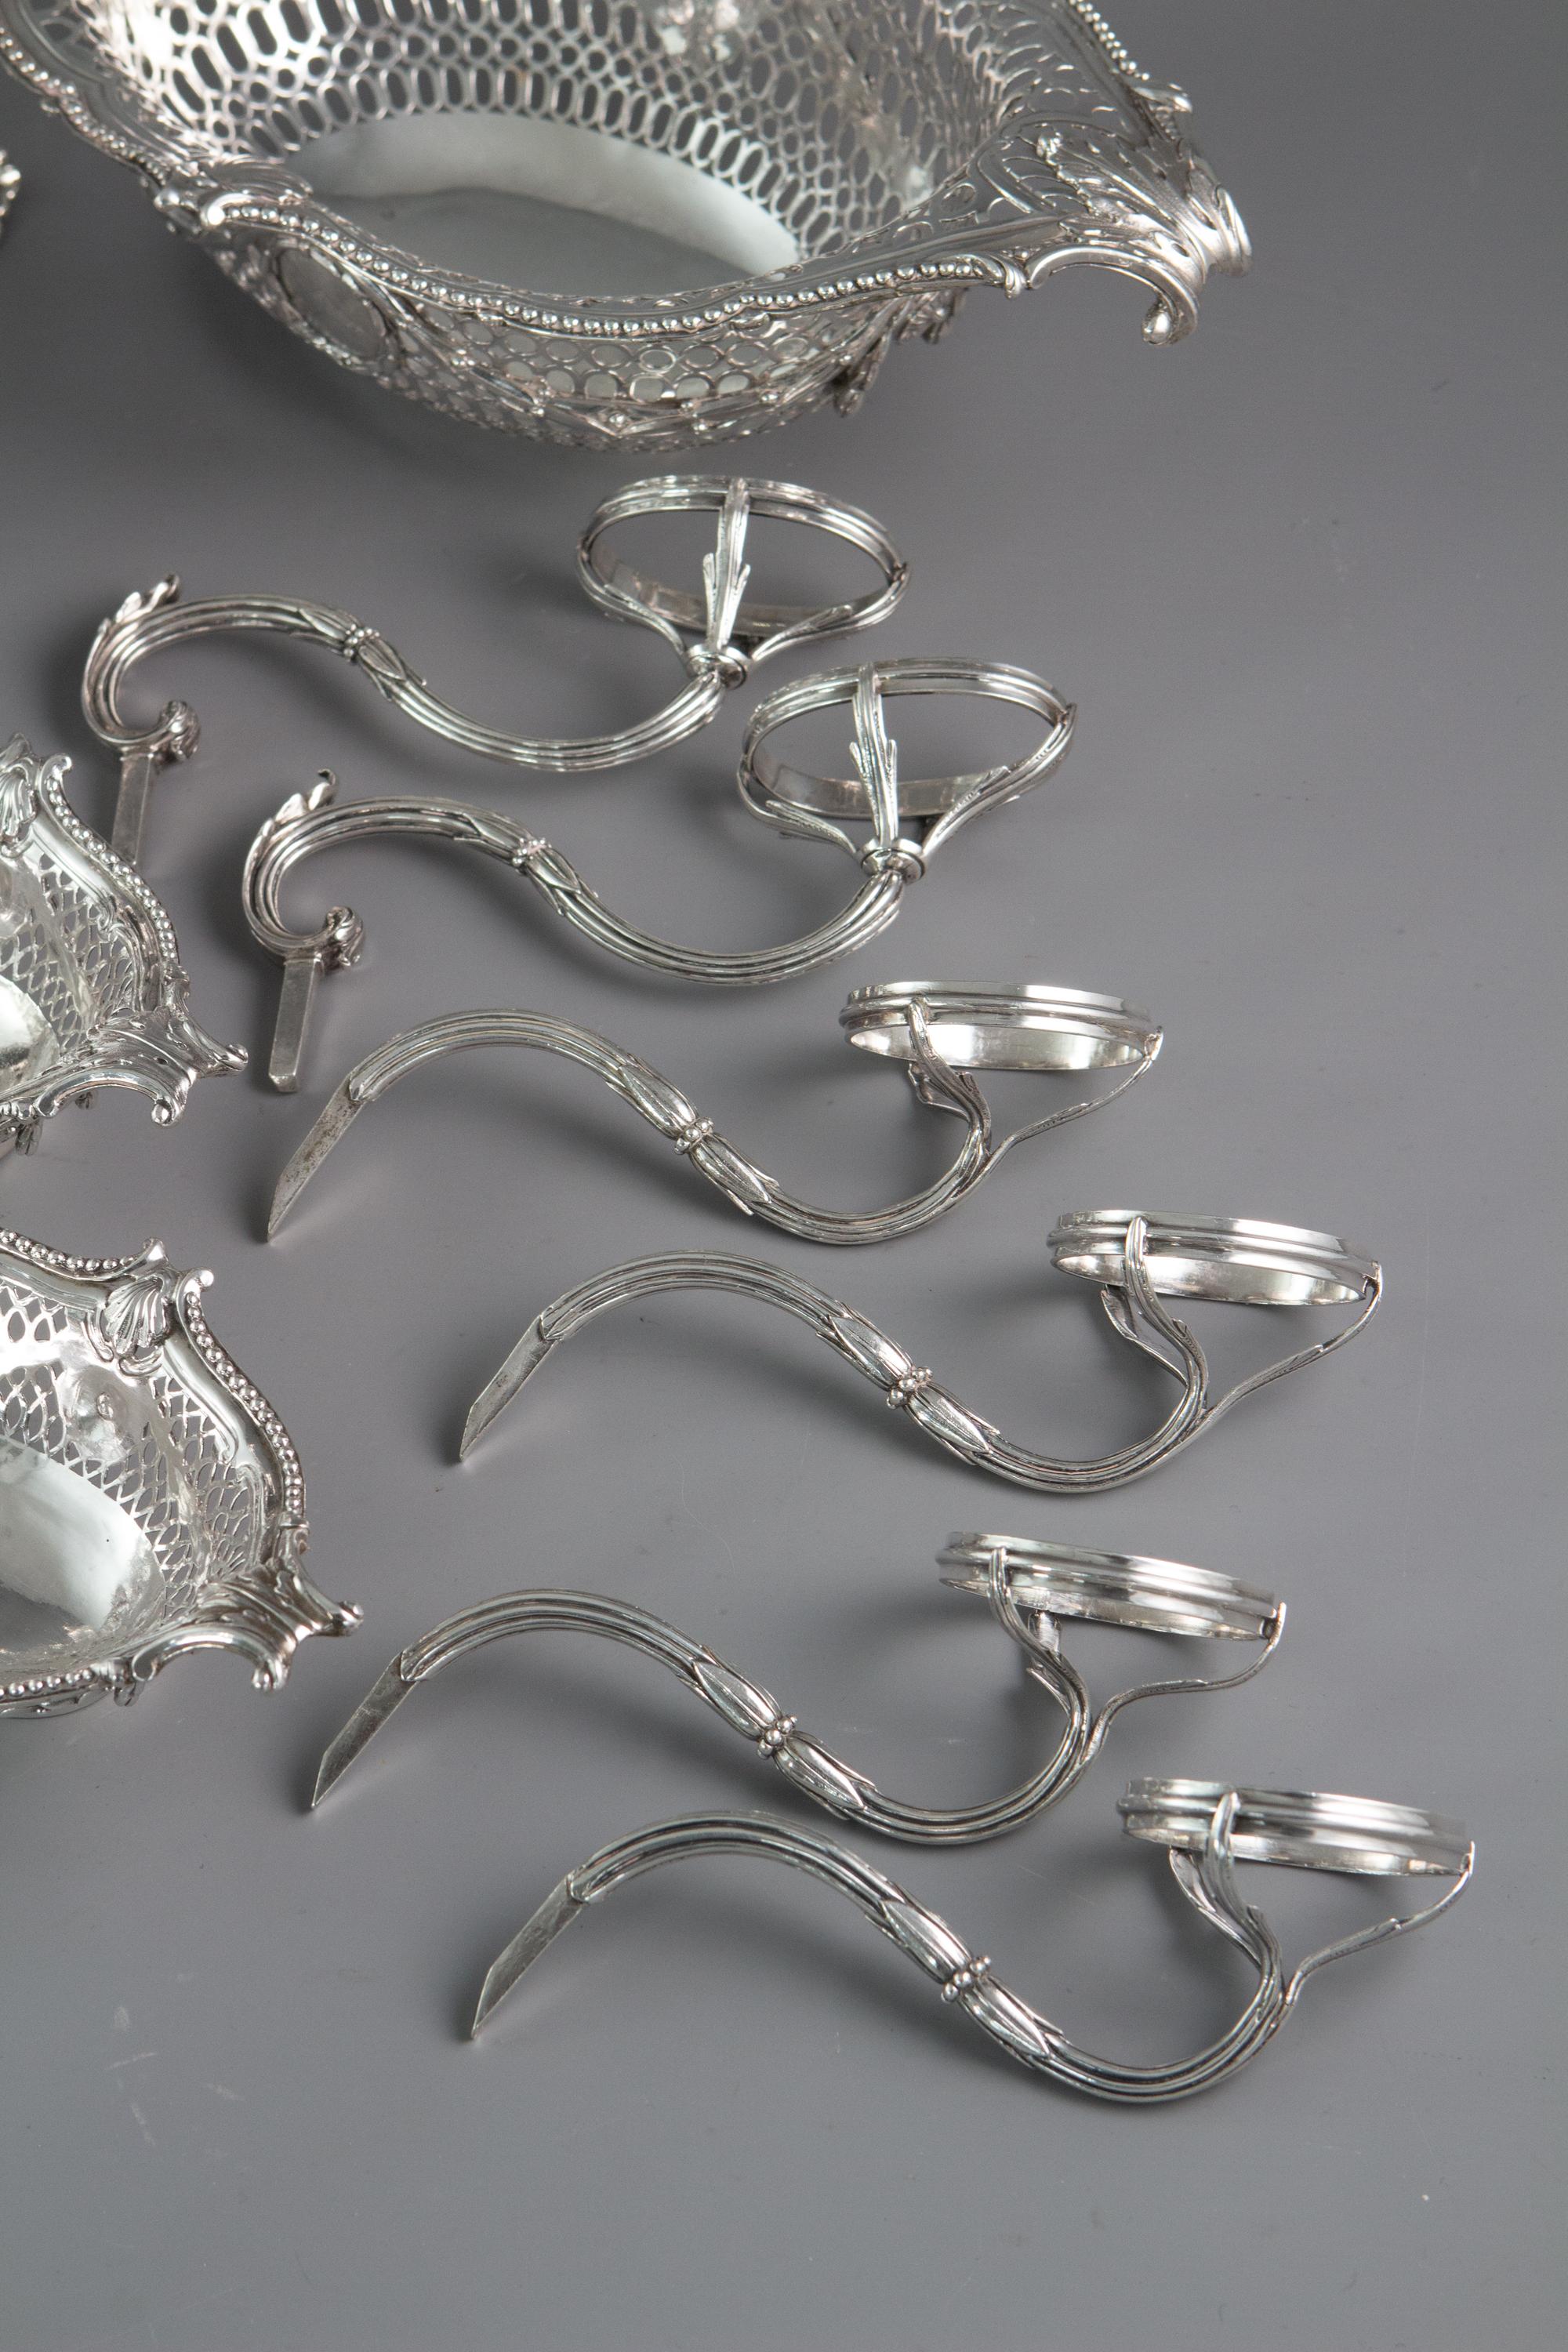 Silver Epergne or Table Centrepiece, Thomas Pitts, London 1773 9